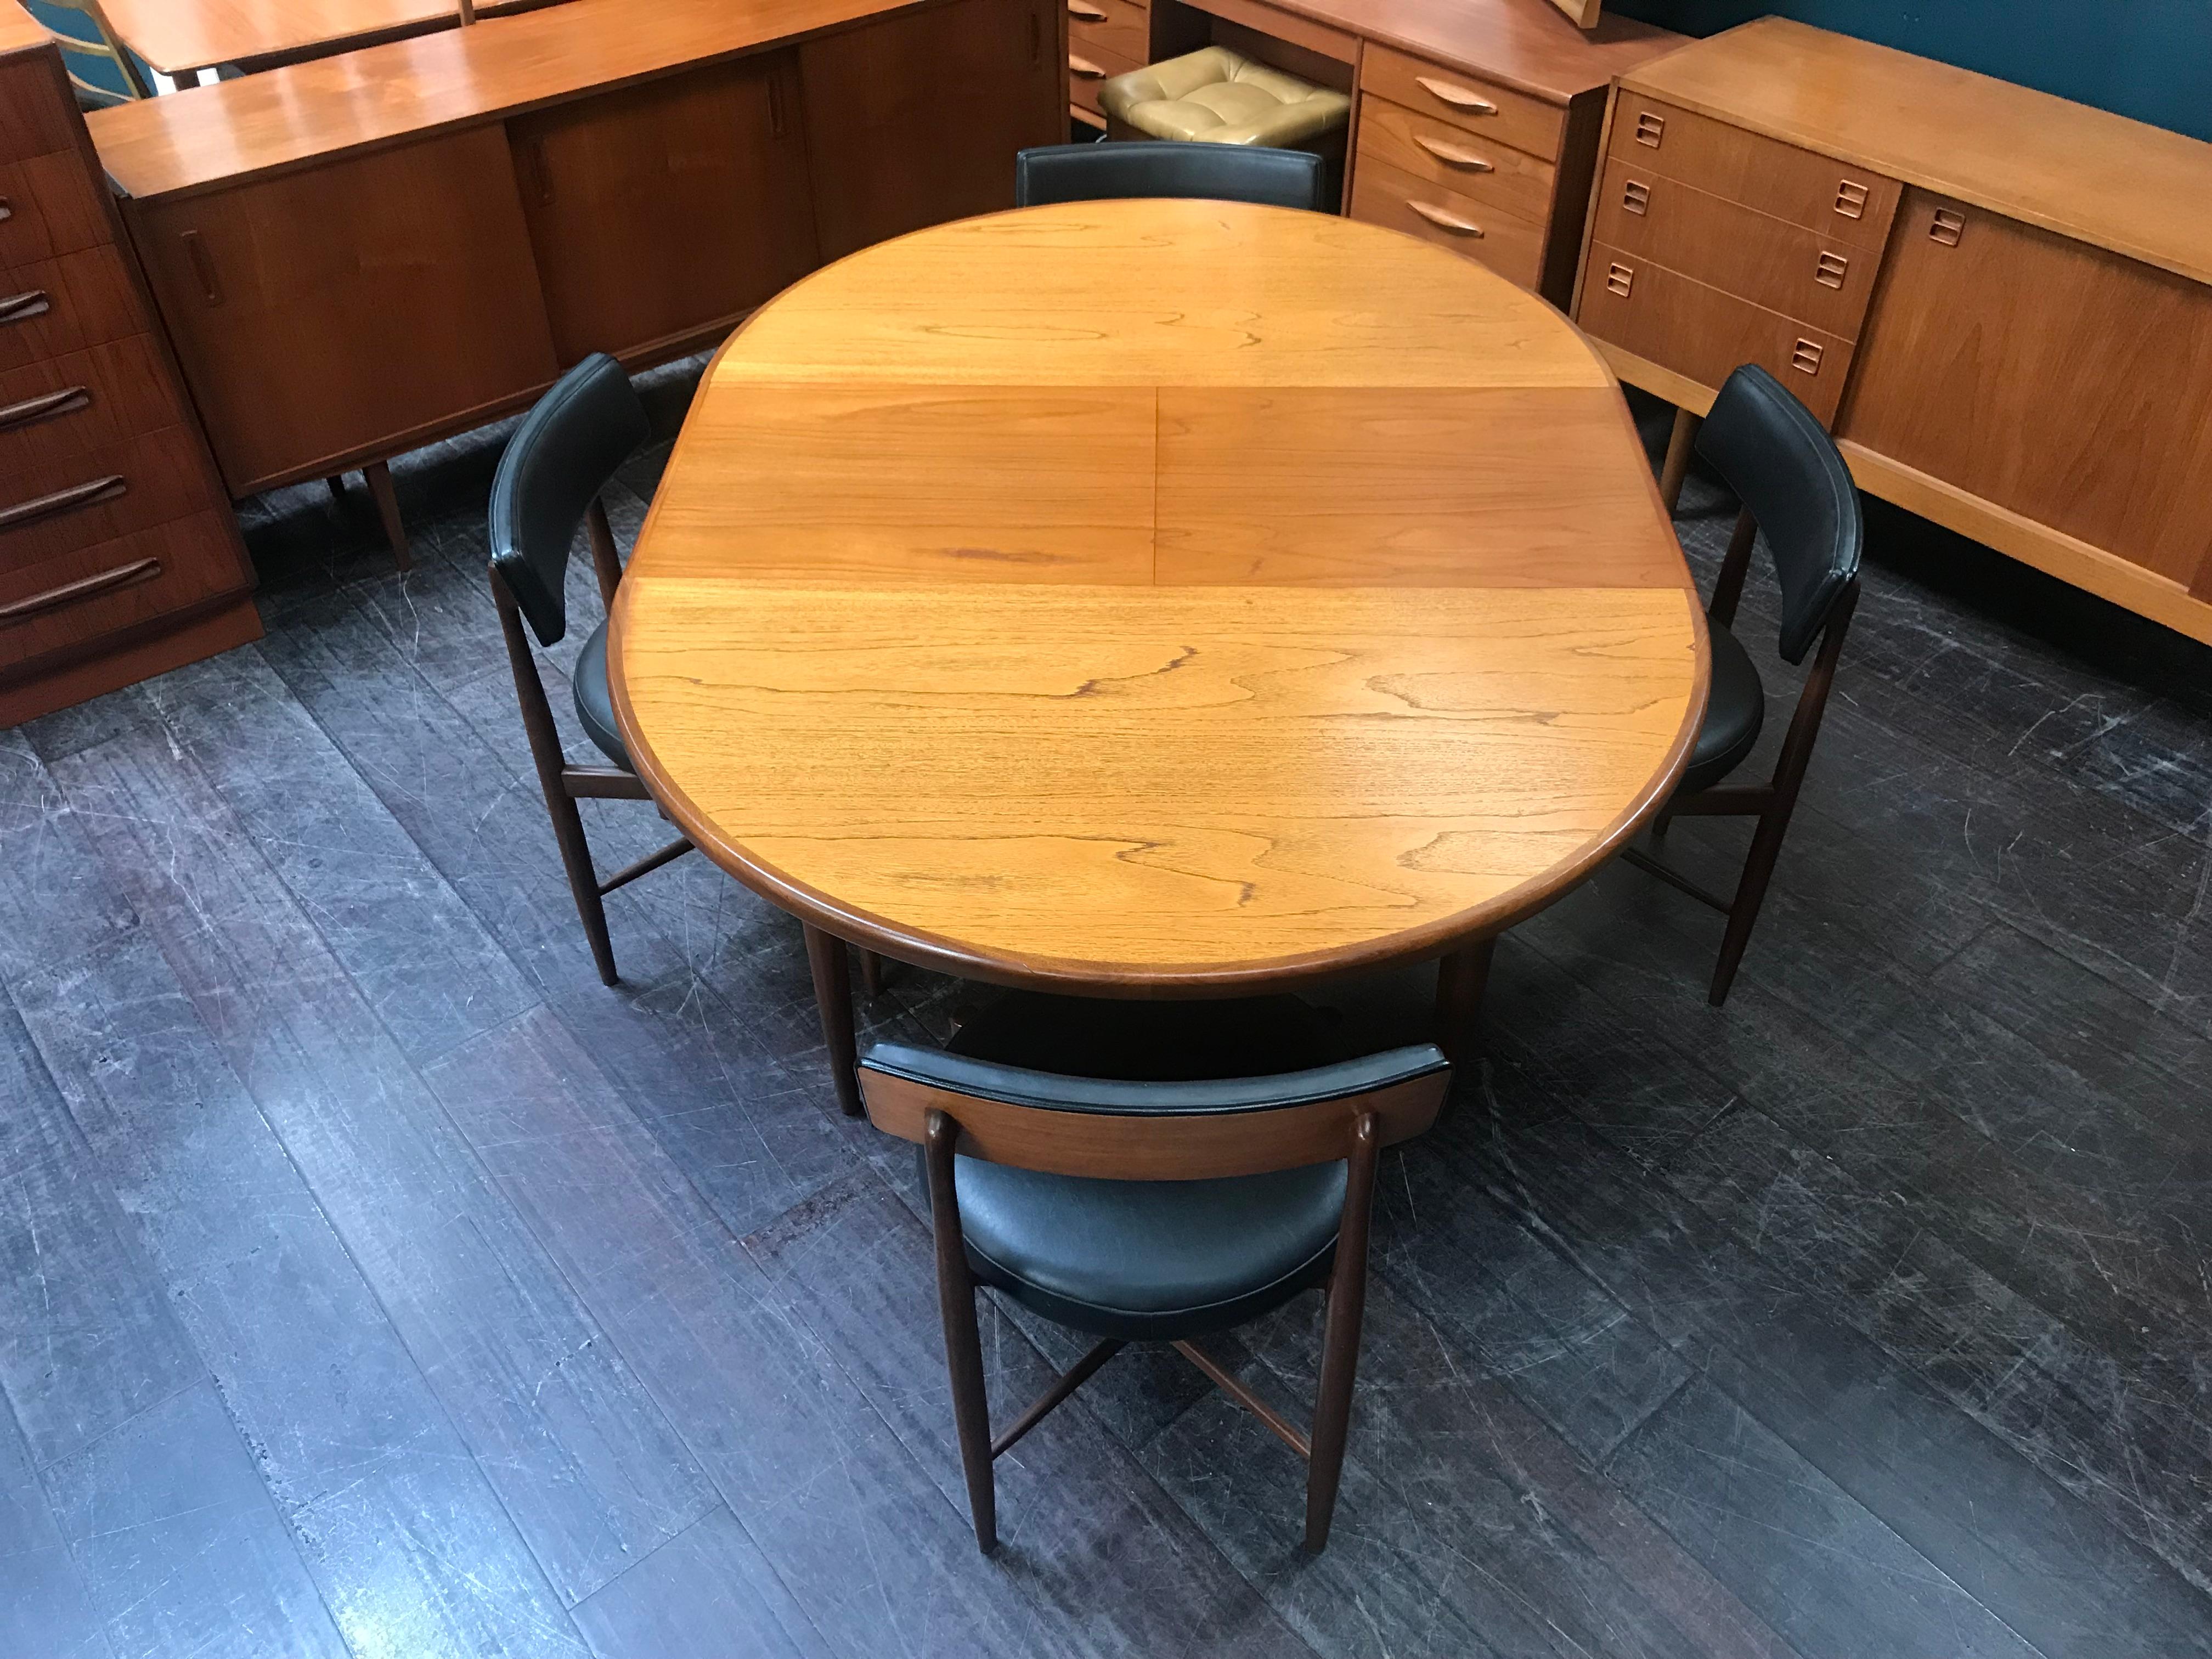 British Midcentury Teak Dining Table G Plan with 4 Chairs by Ib Kofod-Larsen For Sale 4